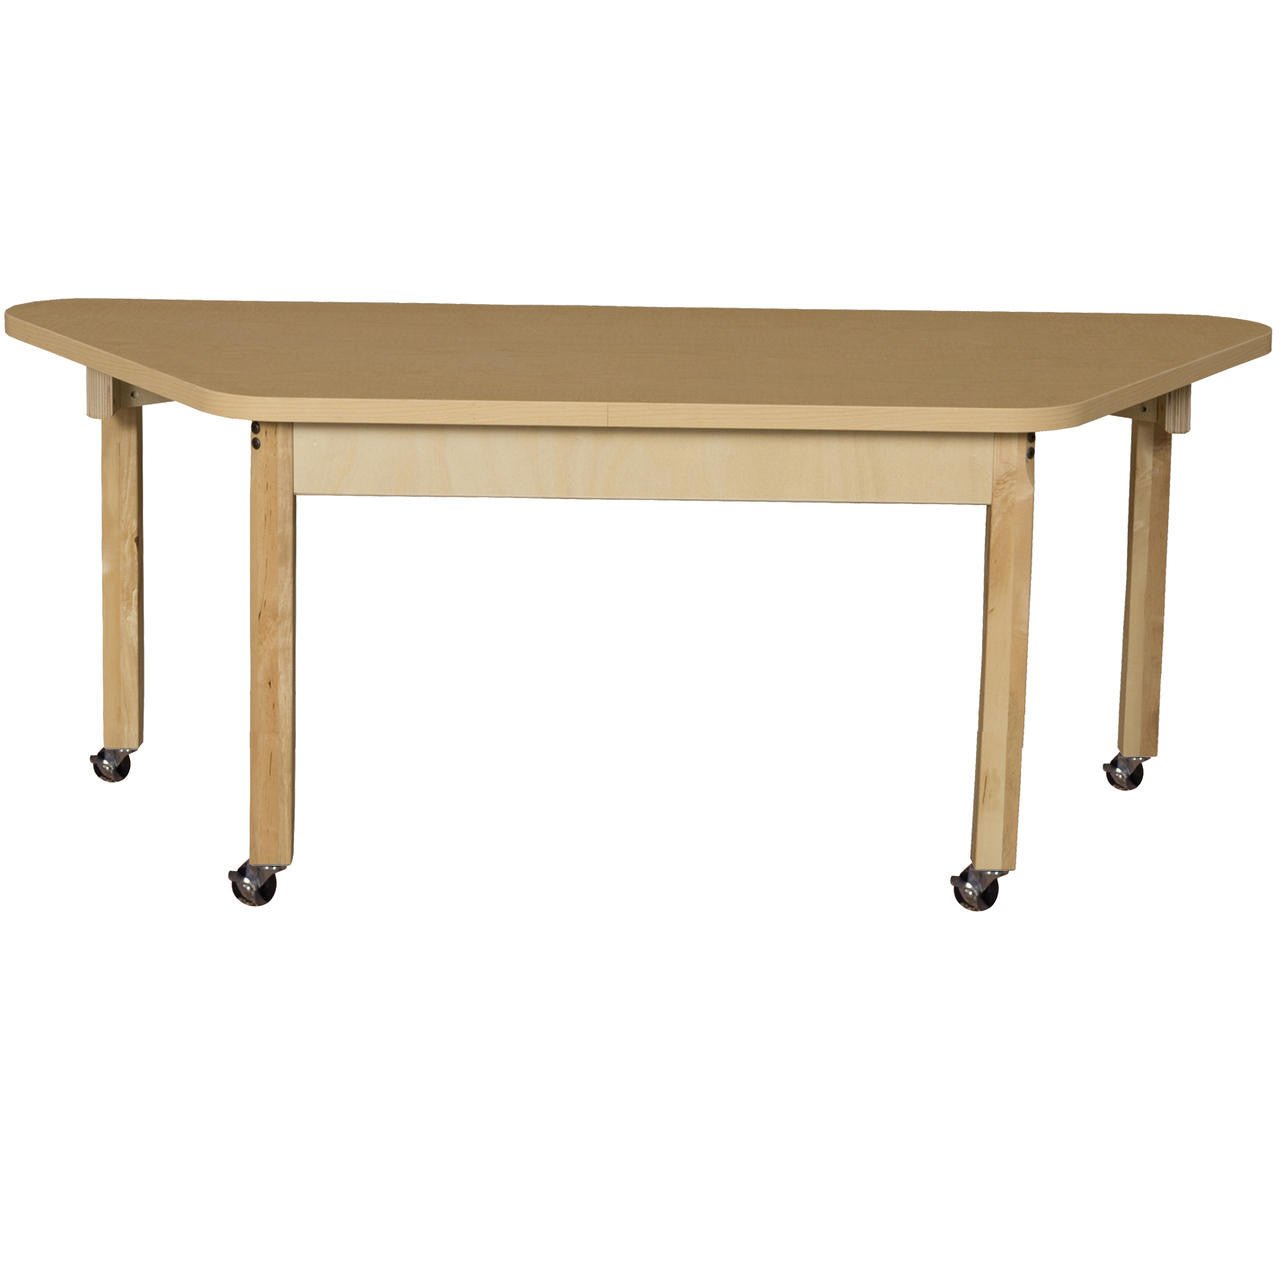 Mobile Trapezoidal High Pressure Laminate Table with Hardwood Legs-14